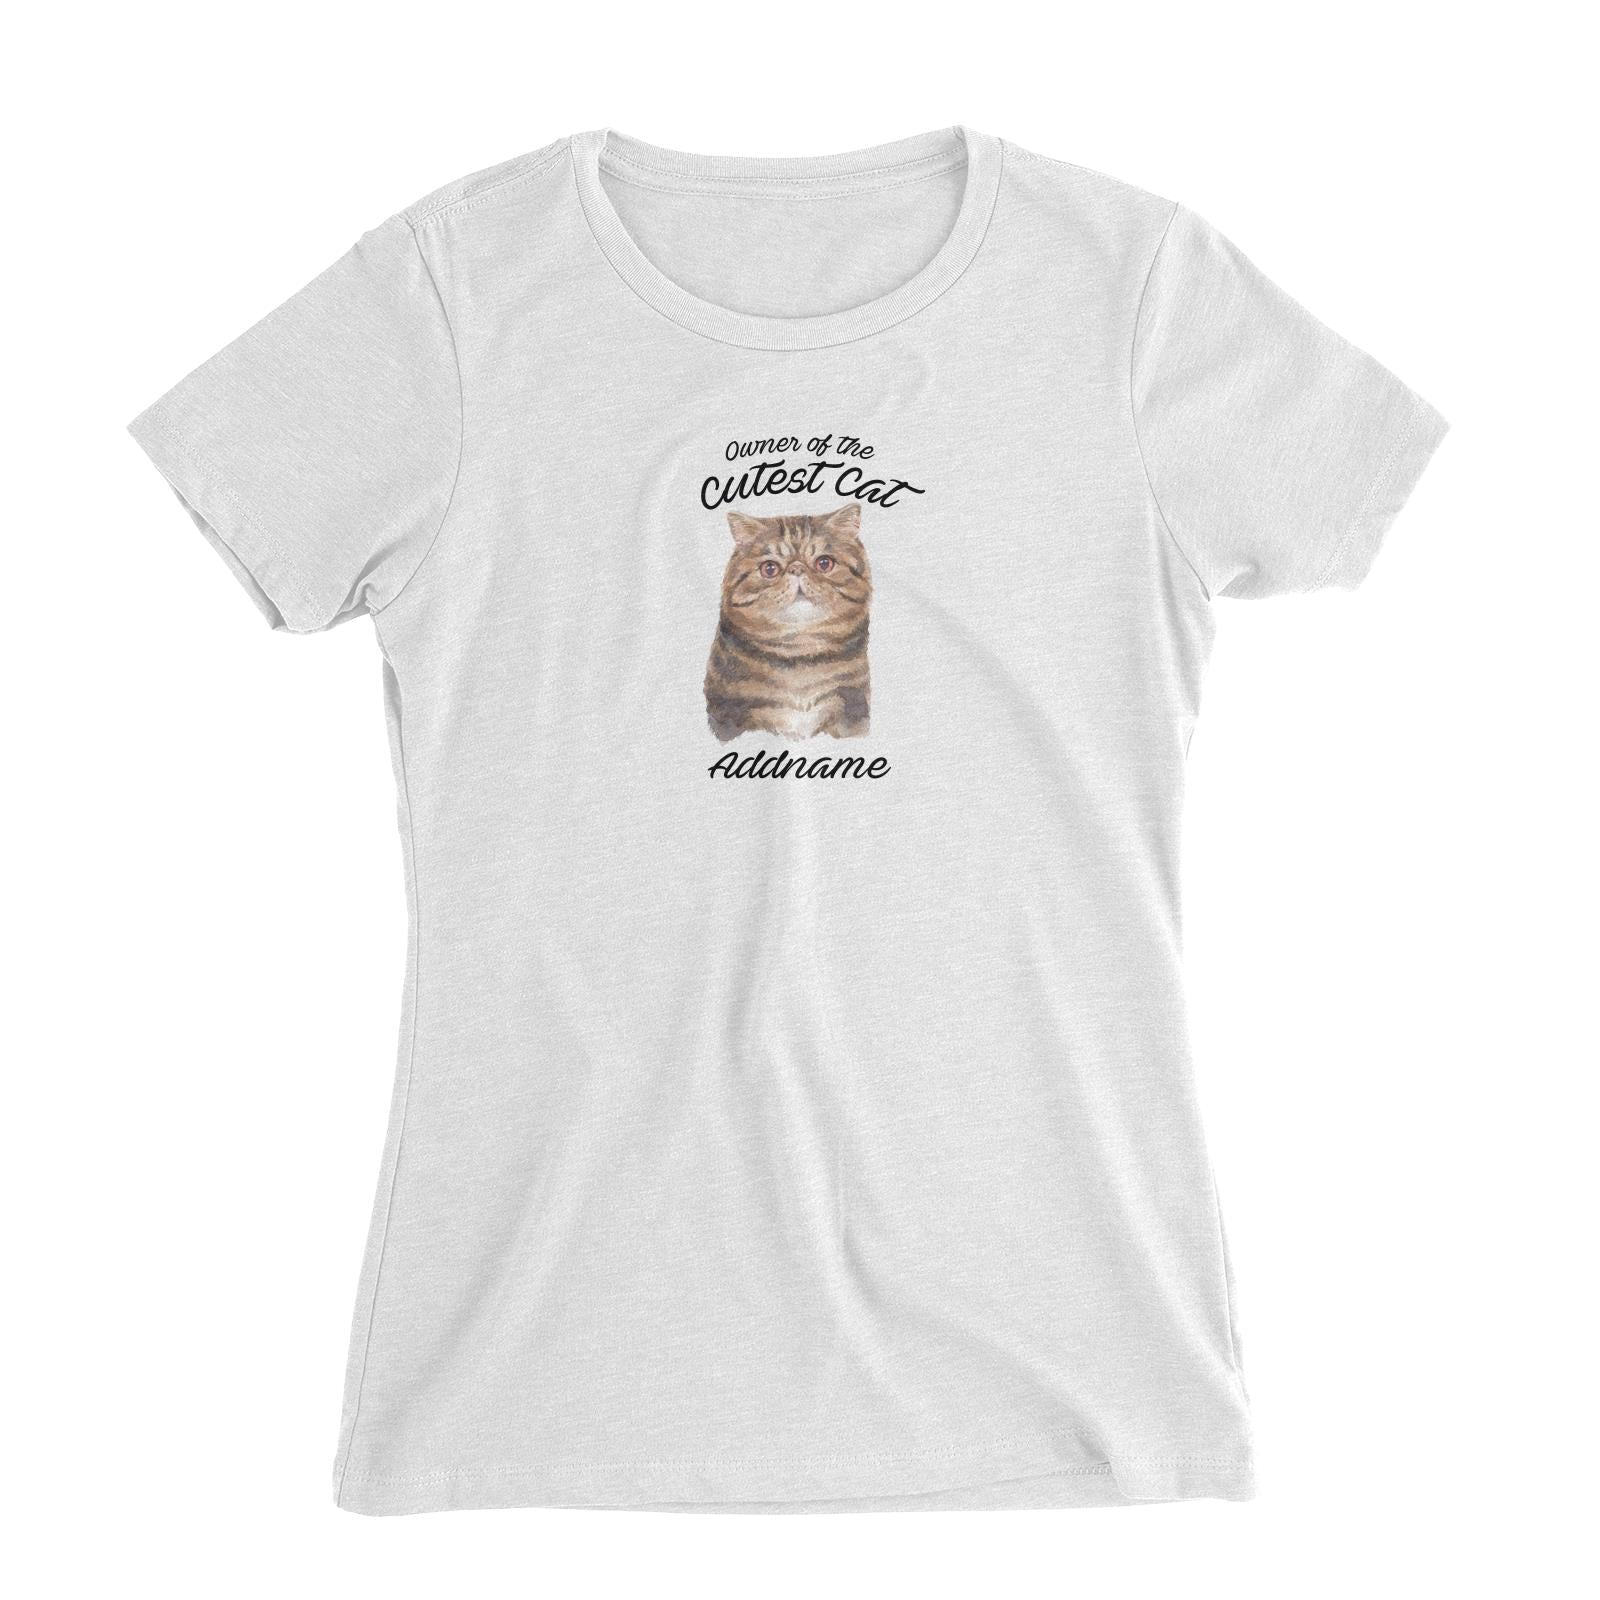 Watercolor Owner Of The Cutest Cat Exotic Shorthair Brown Addname Women's Slim Fit T-Shirt